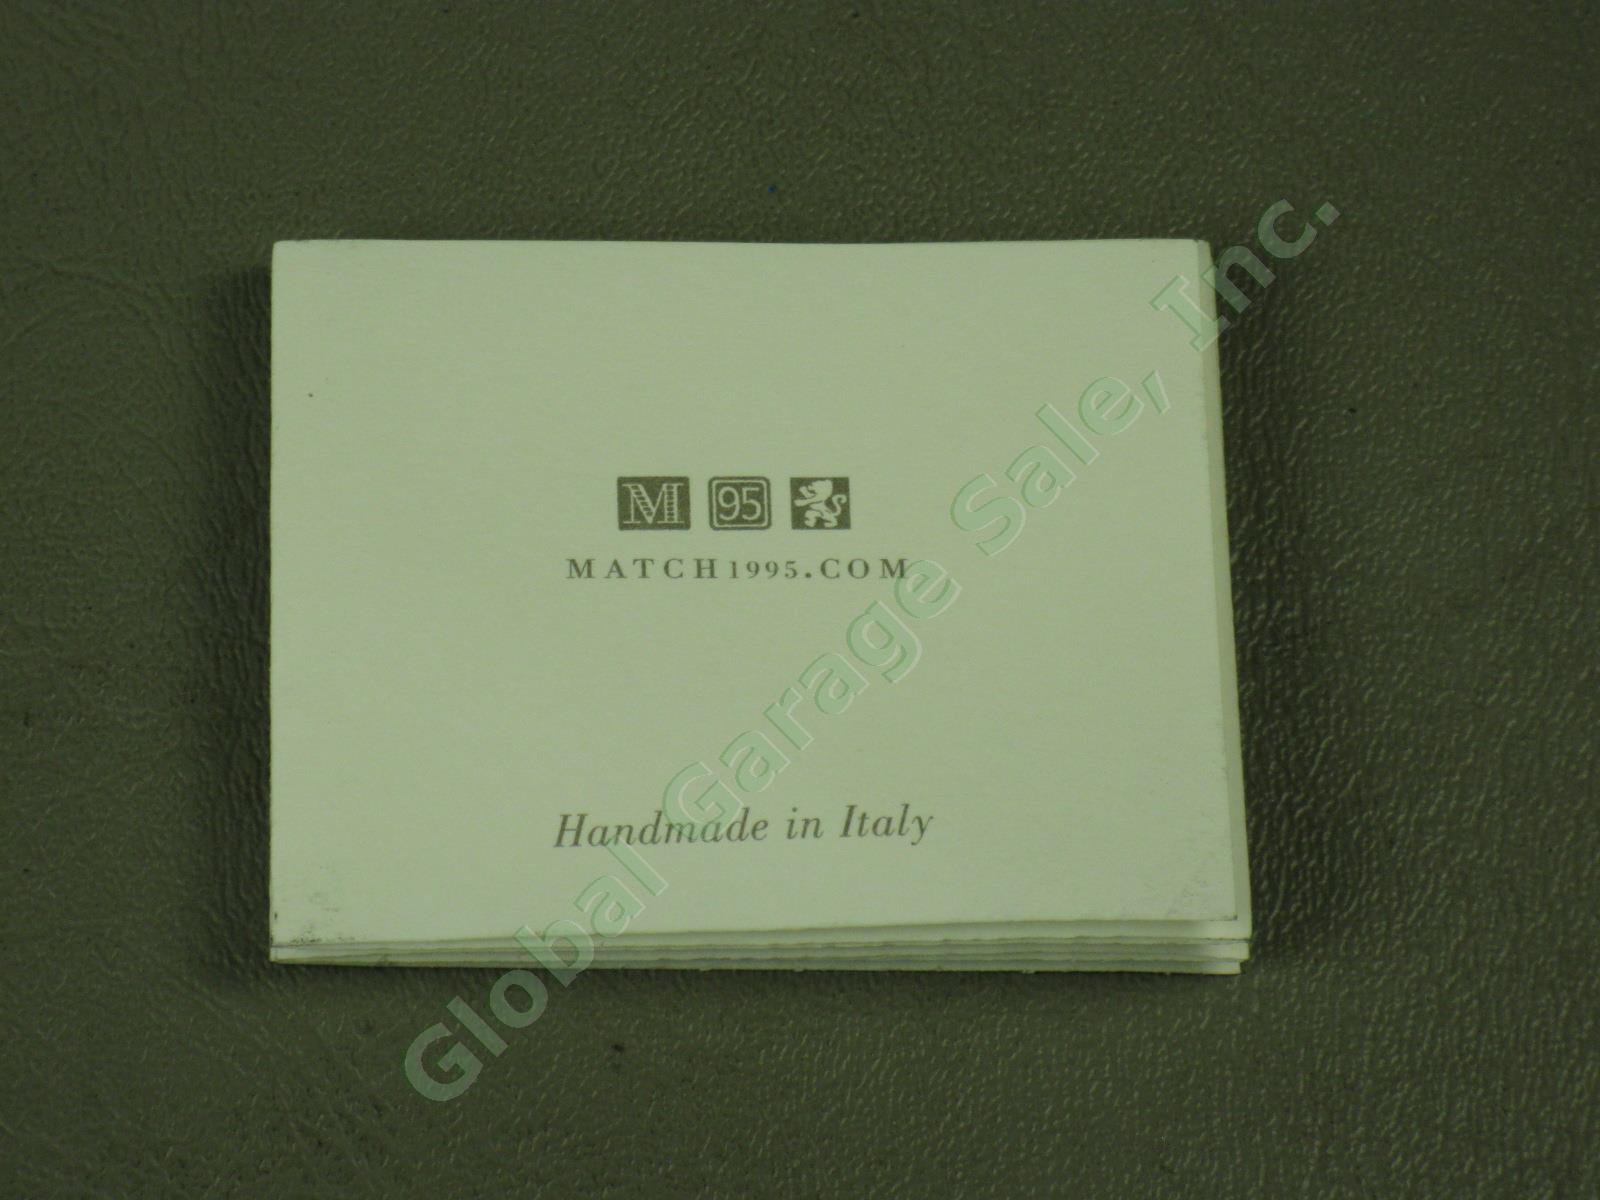 NEW Match Pewter Square Tissue Box Cover Holder Handmade In Italy Retail $280 NR 9